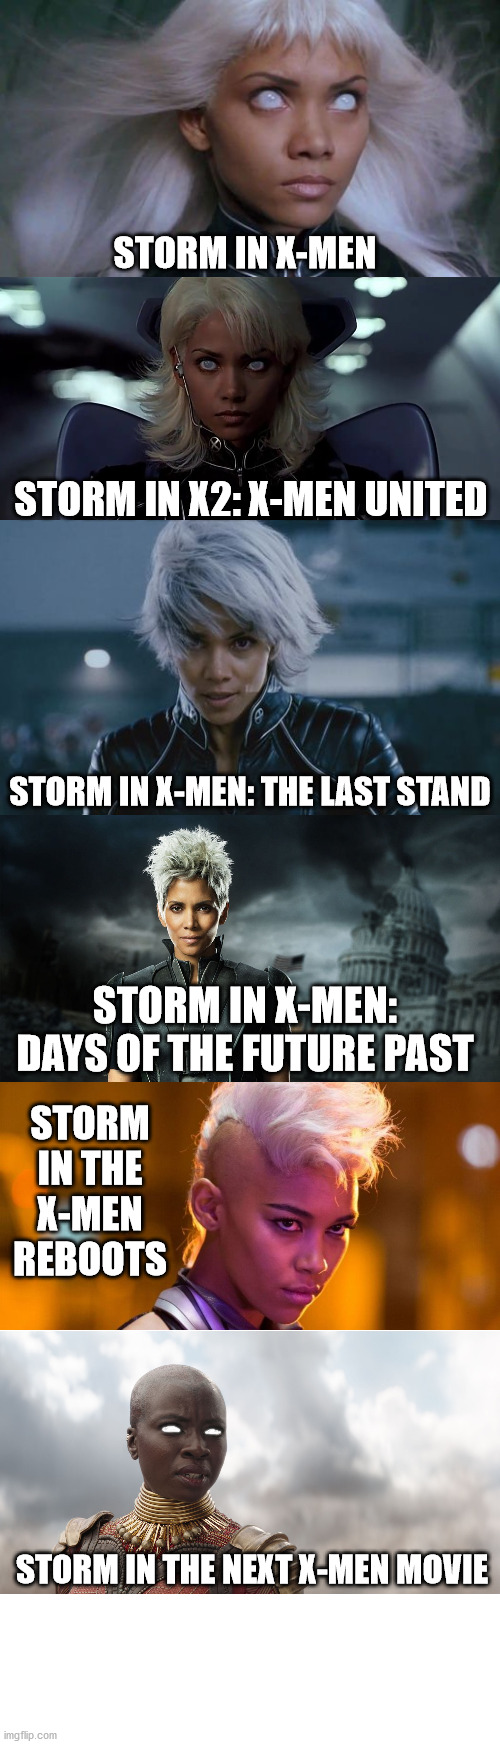 Storm's hair is slowly disappearing... | STORM IN X-MEN; STORM IN X2: X-MEN UNITED; STORM IN X-MEN: THE LAST STAND; STORM IN X-MEN: DAYS OF THE FUTURE PAST; STORM IN THE X-MEN REBOOTS; STORM IN THE NEXT X-MEN MOVIE | image tagged in marvel,storm,funny,meme,x-men | made w/ Imgflip meme maker